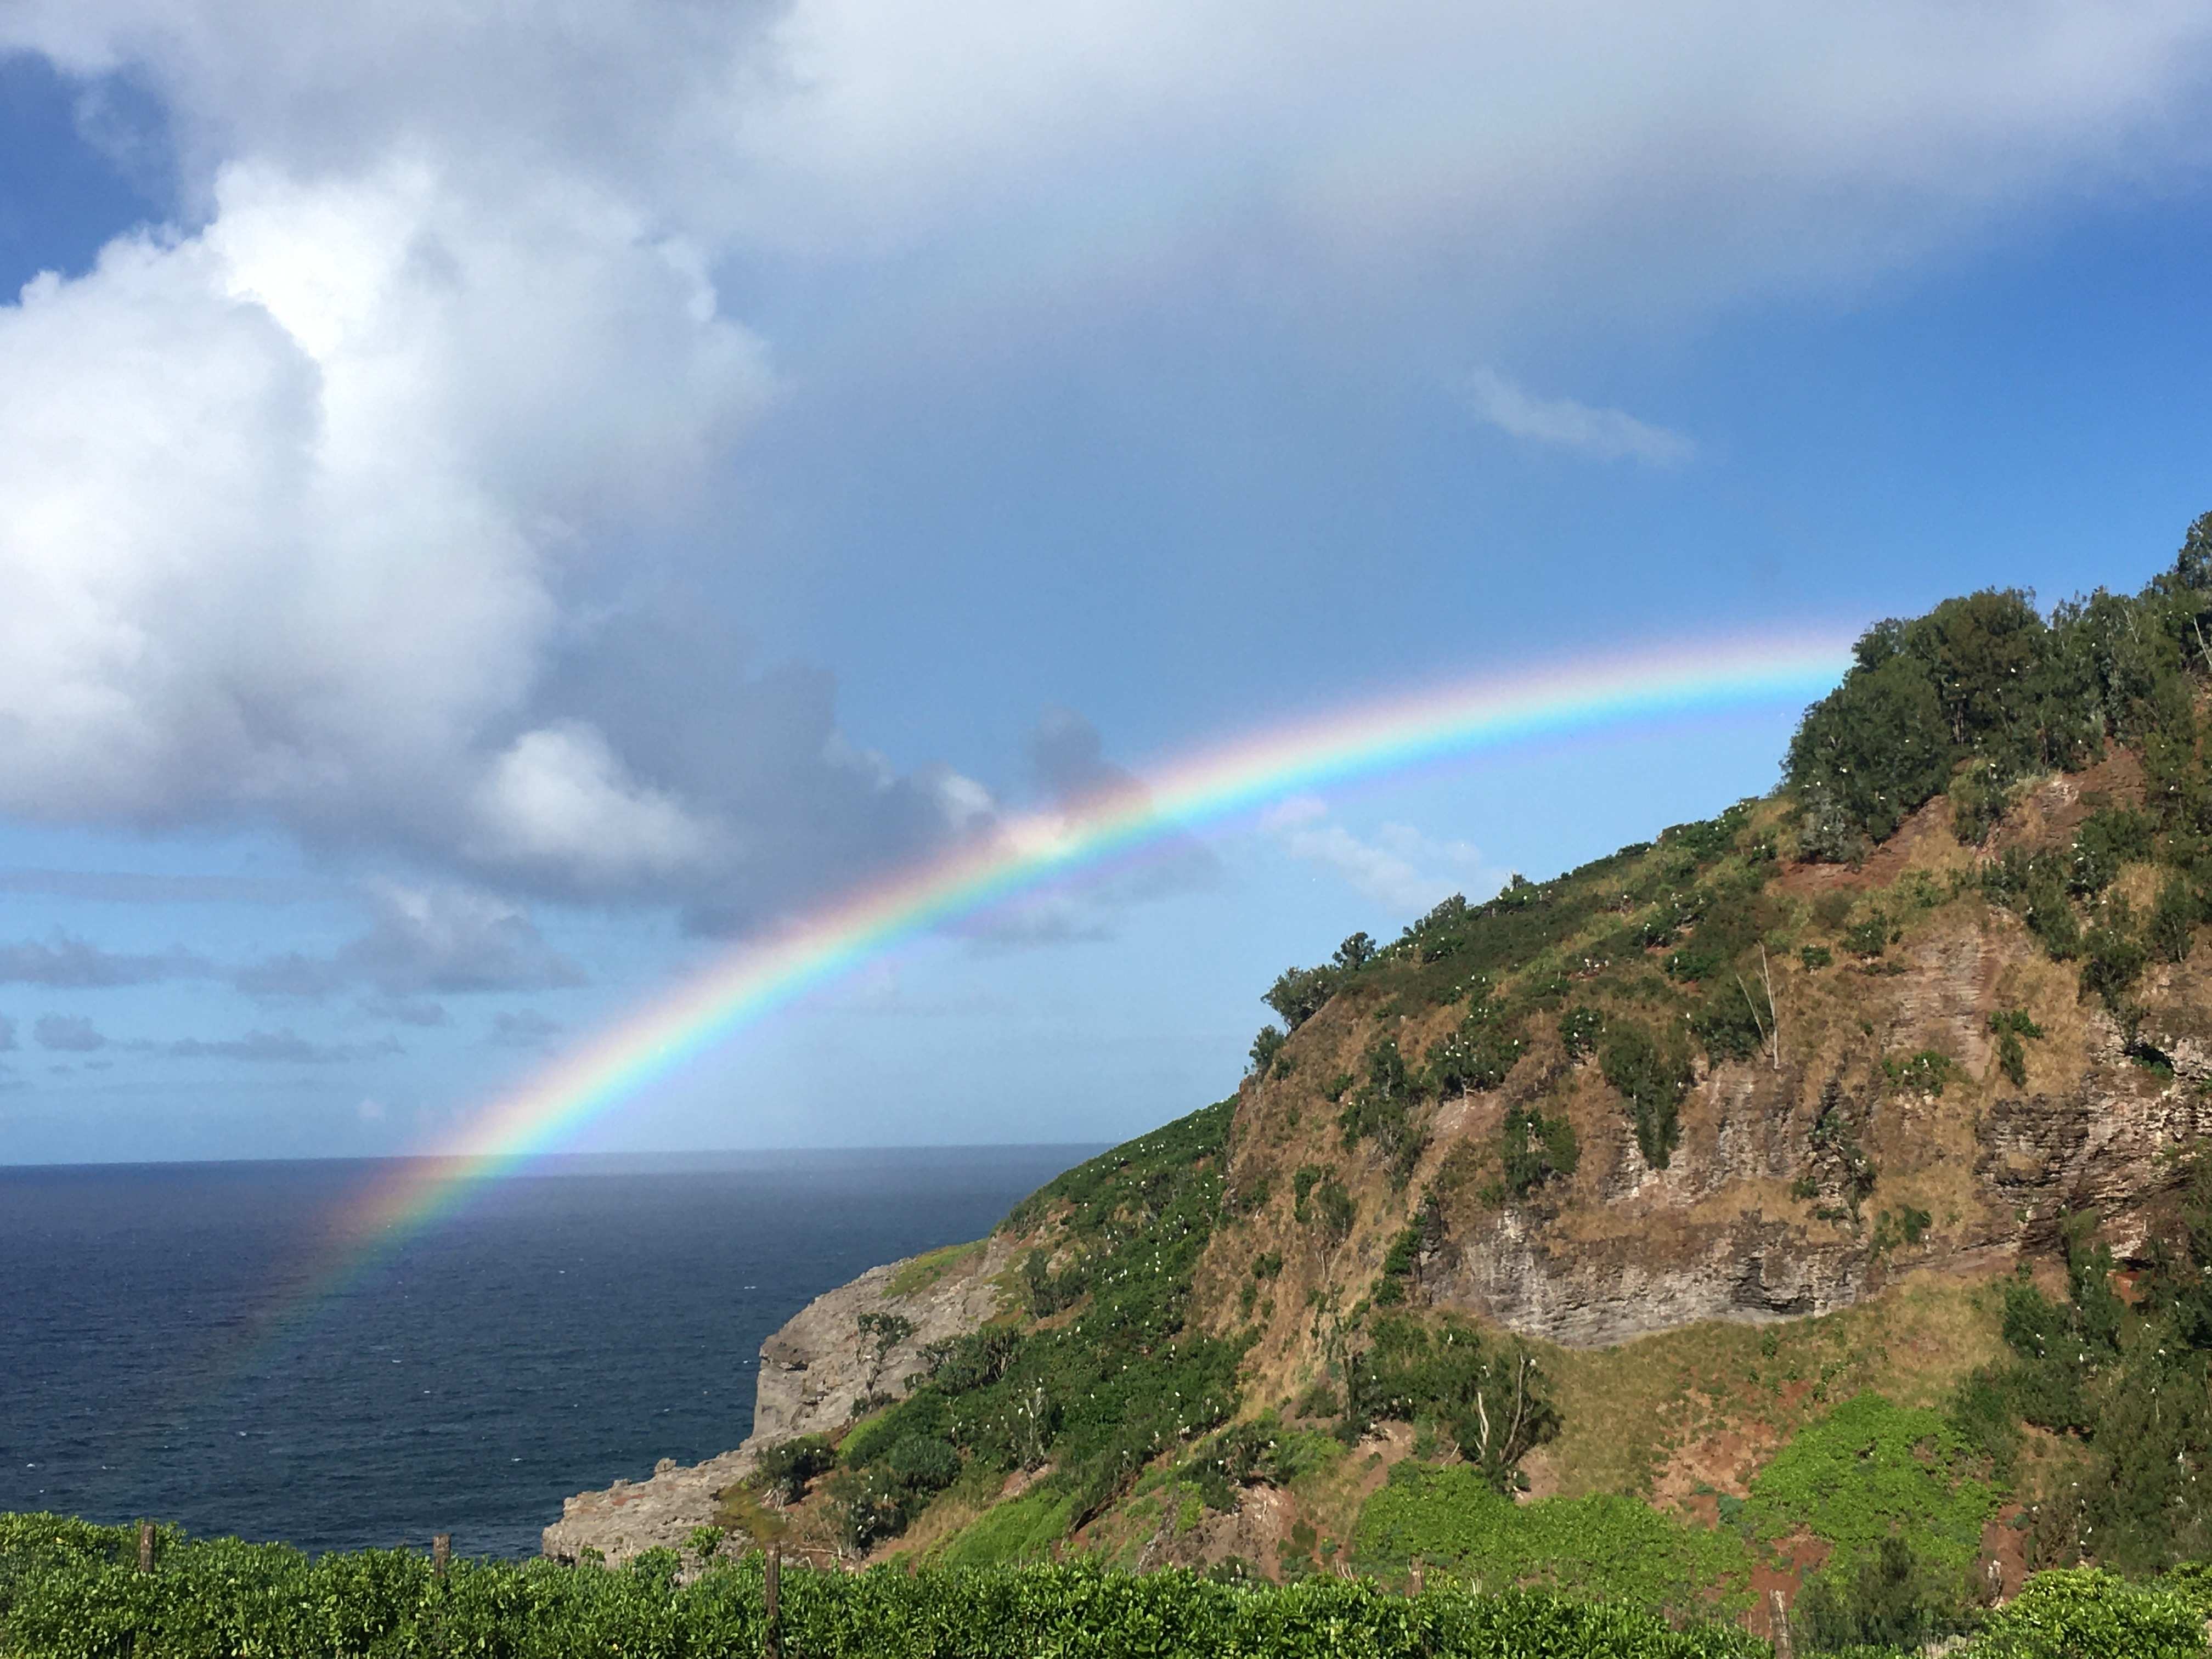 A vibrant rainbow decorates the sky over a sea cliff that is speckled with white seabirds